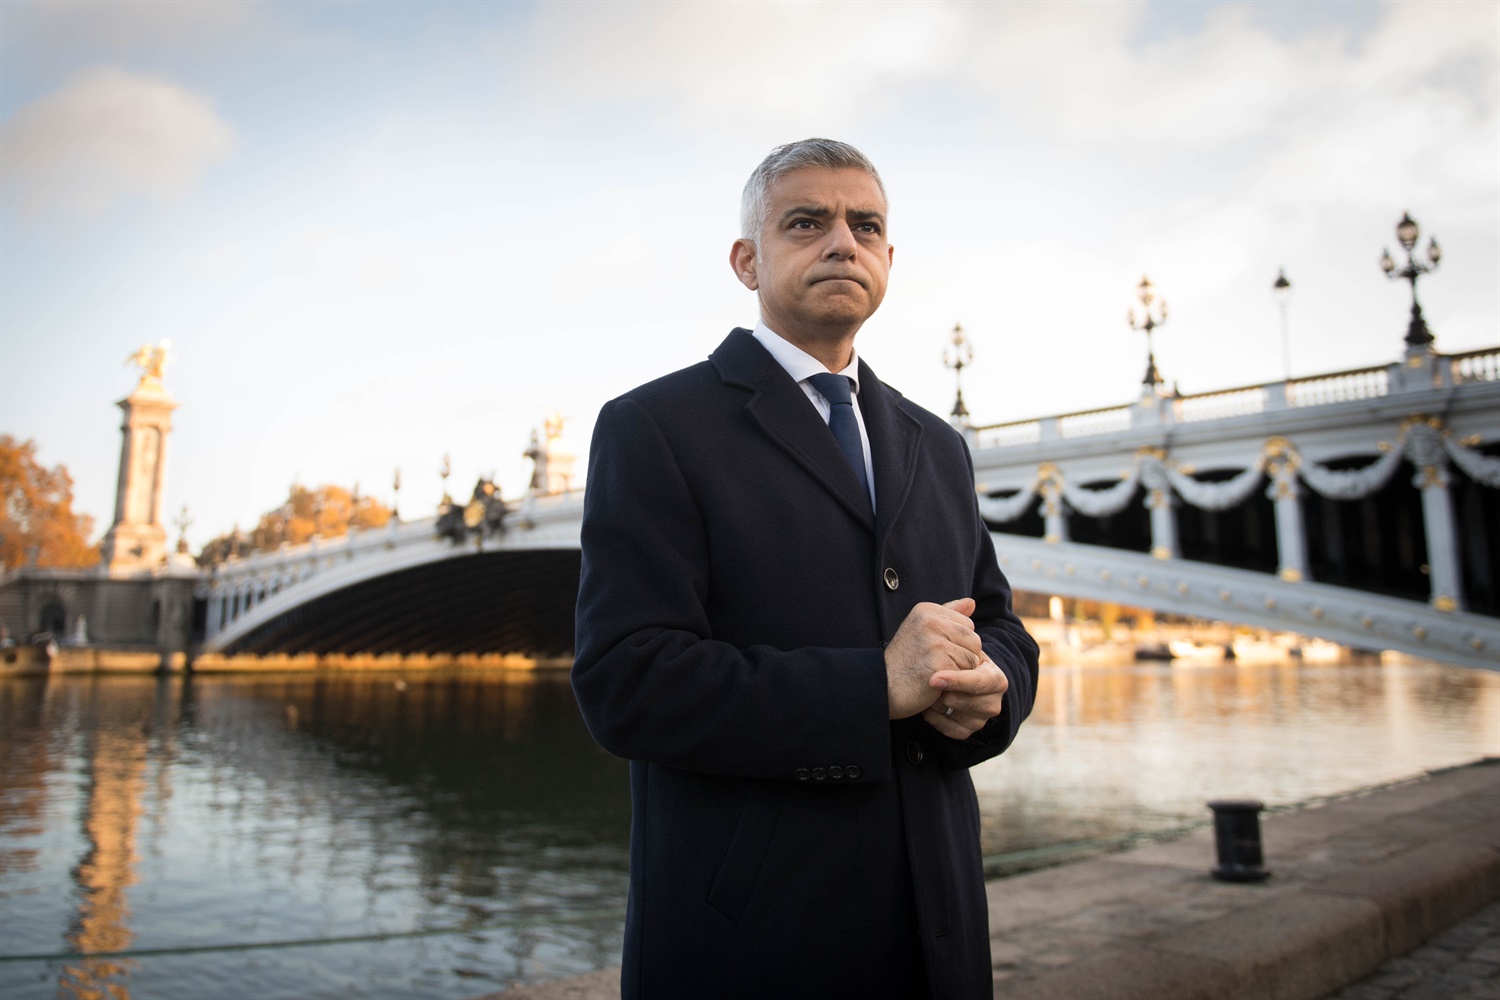 Crossrail could need even more bailout cash as Khan lashes out at ‘unfit’ governance